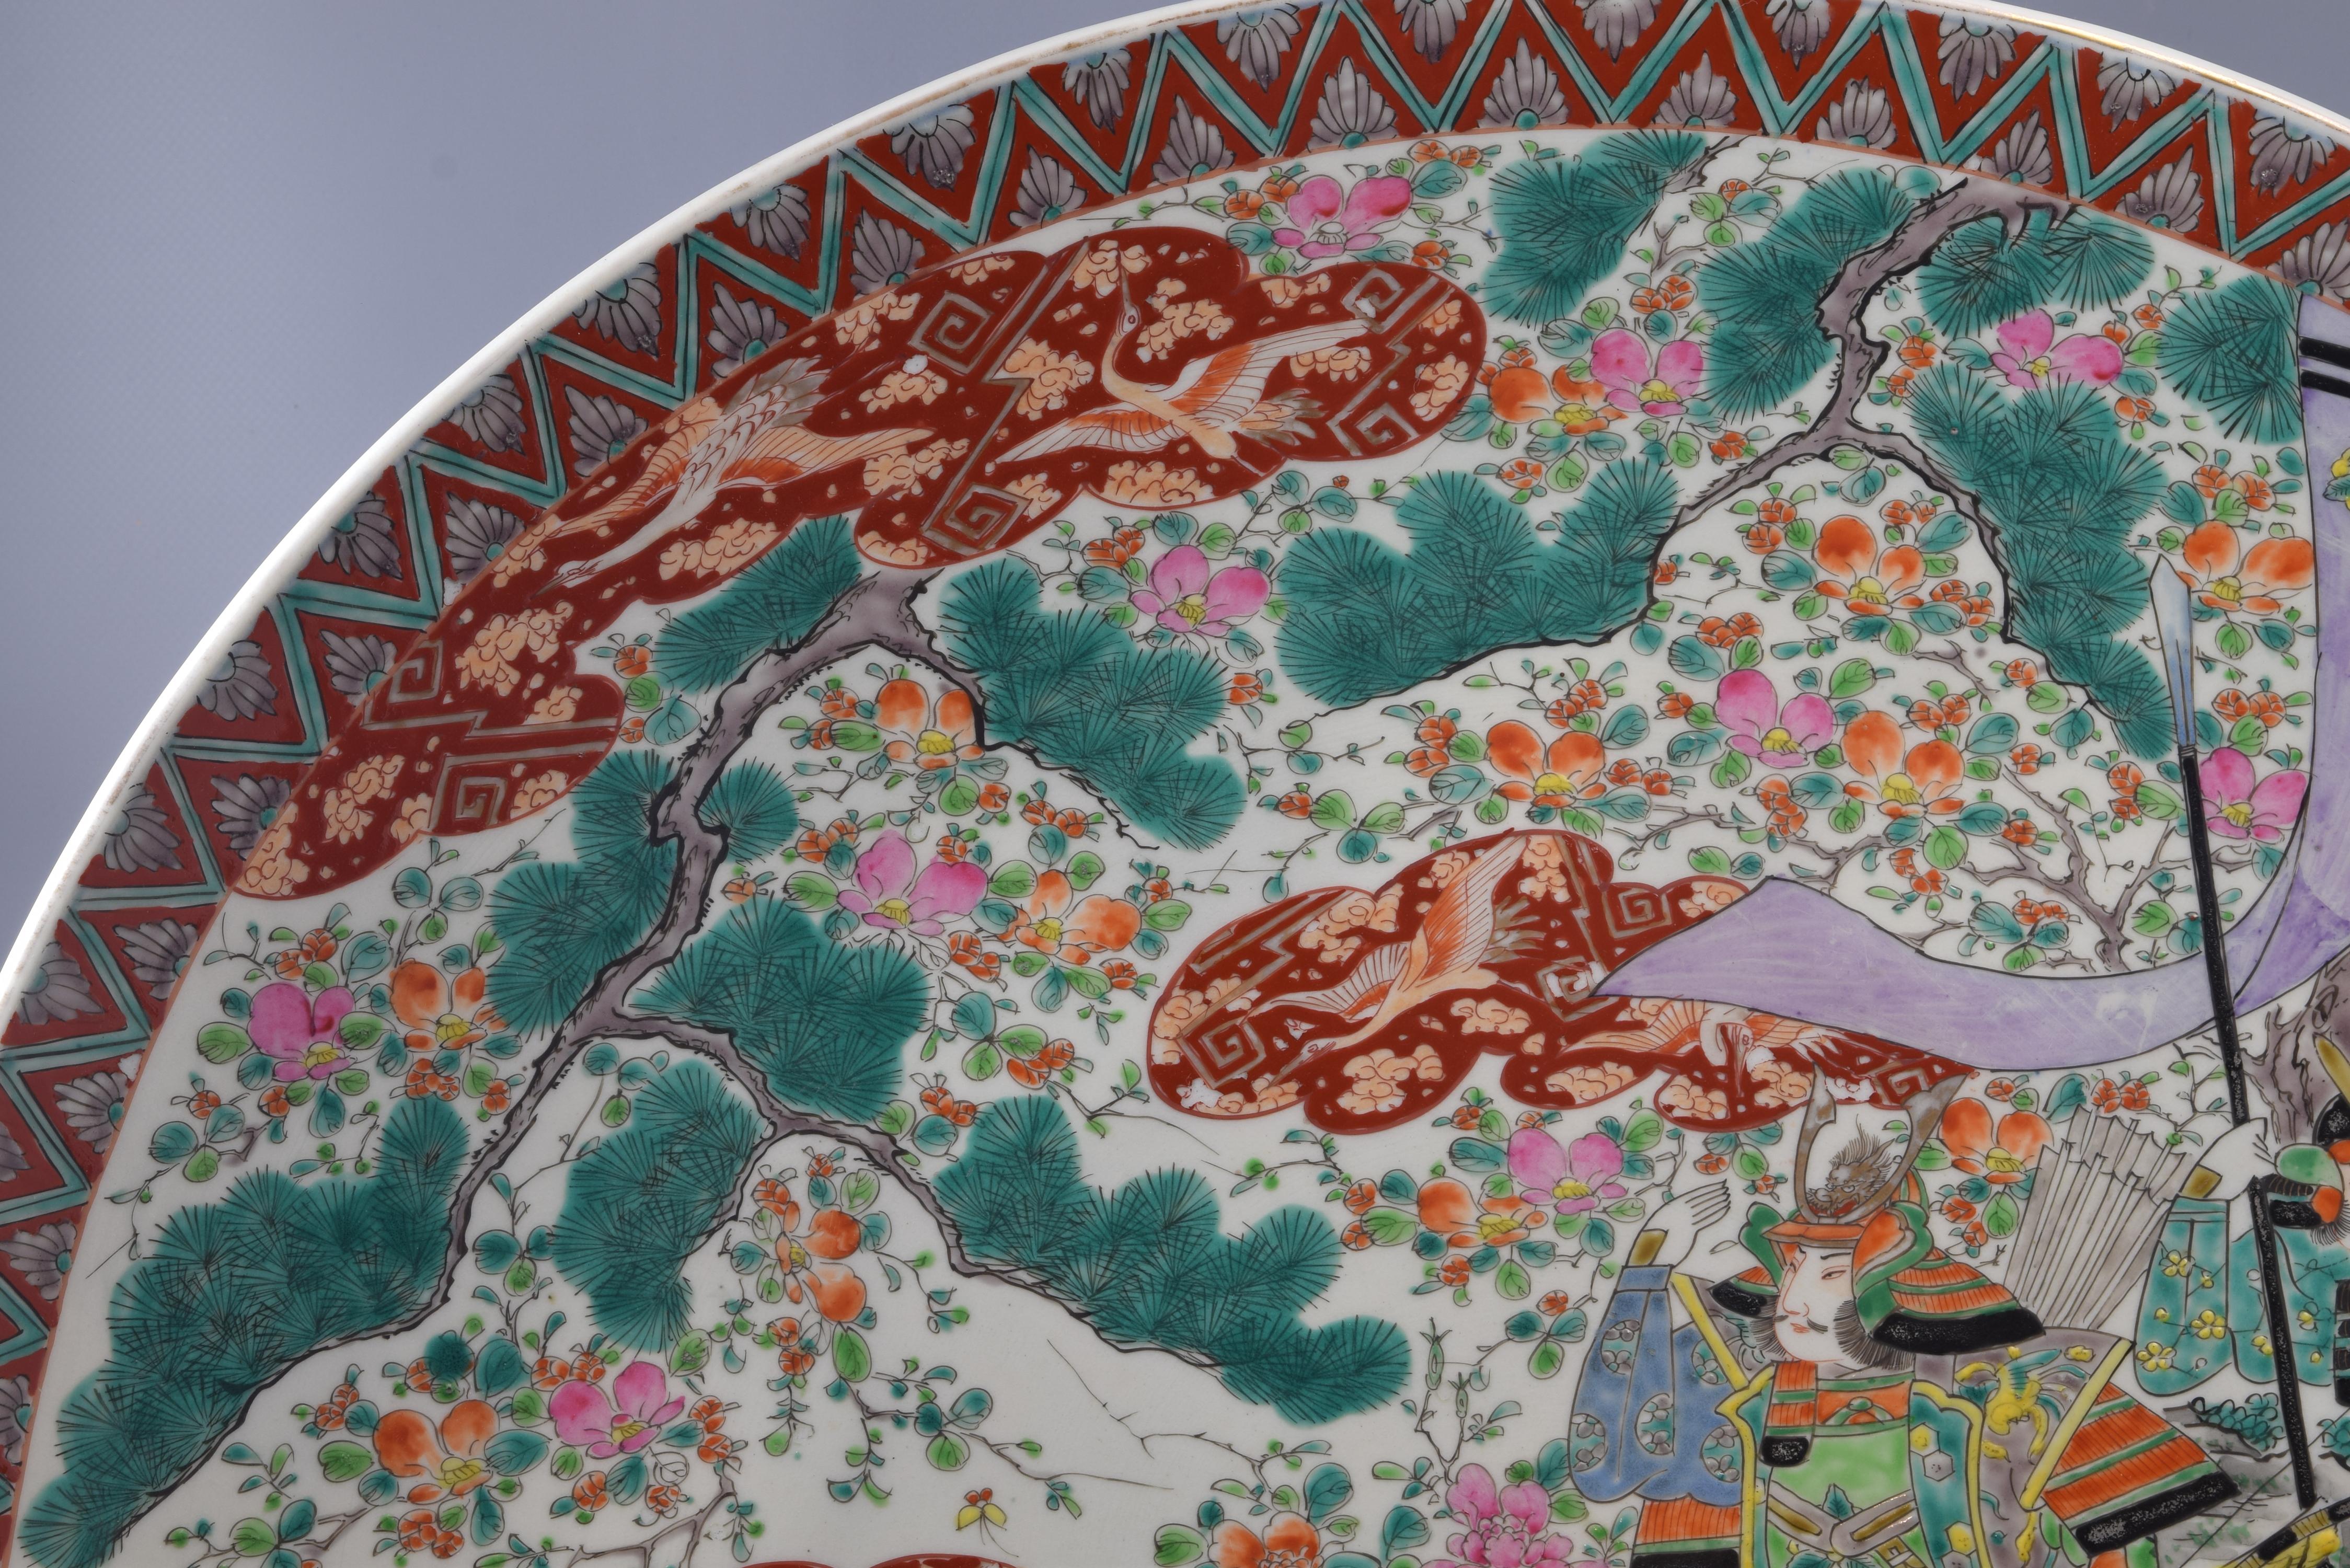 Charger or Plate. Porcelain. Possibly, Imari, Japan, 19th Century 1